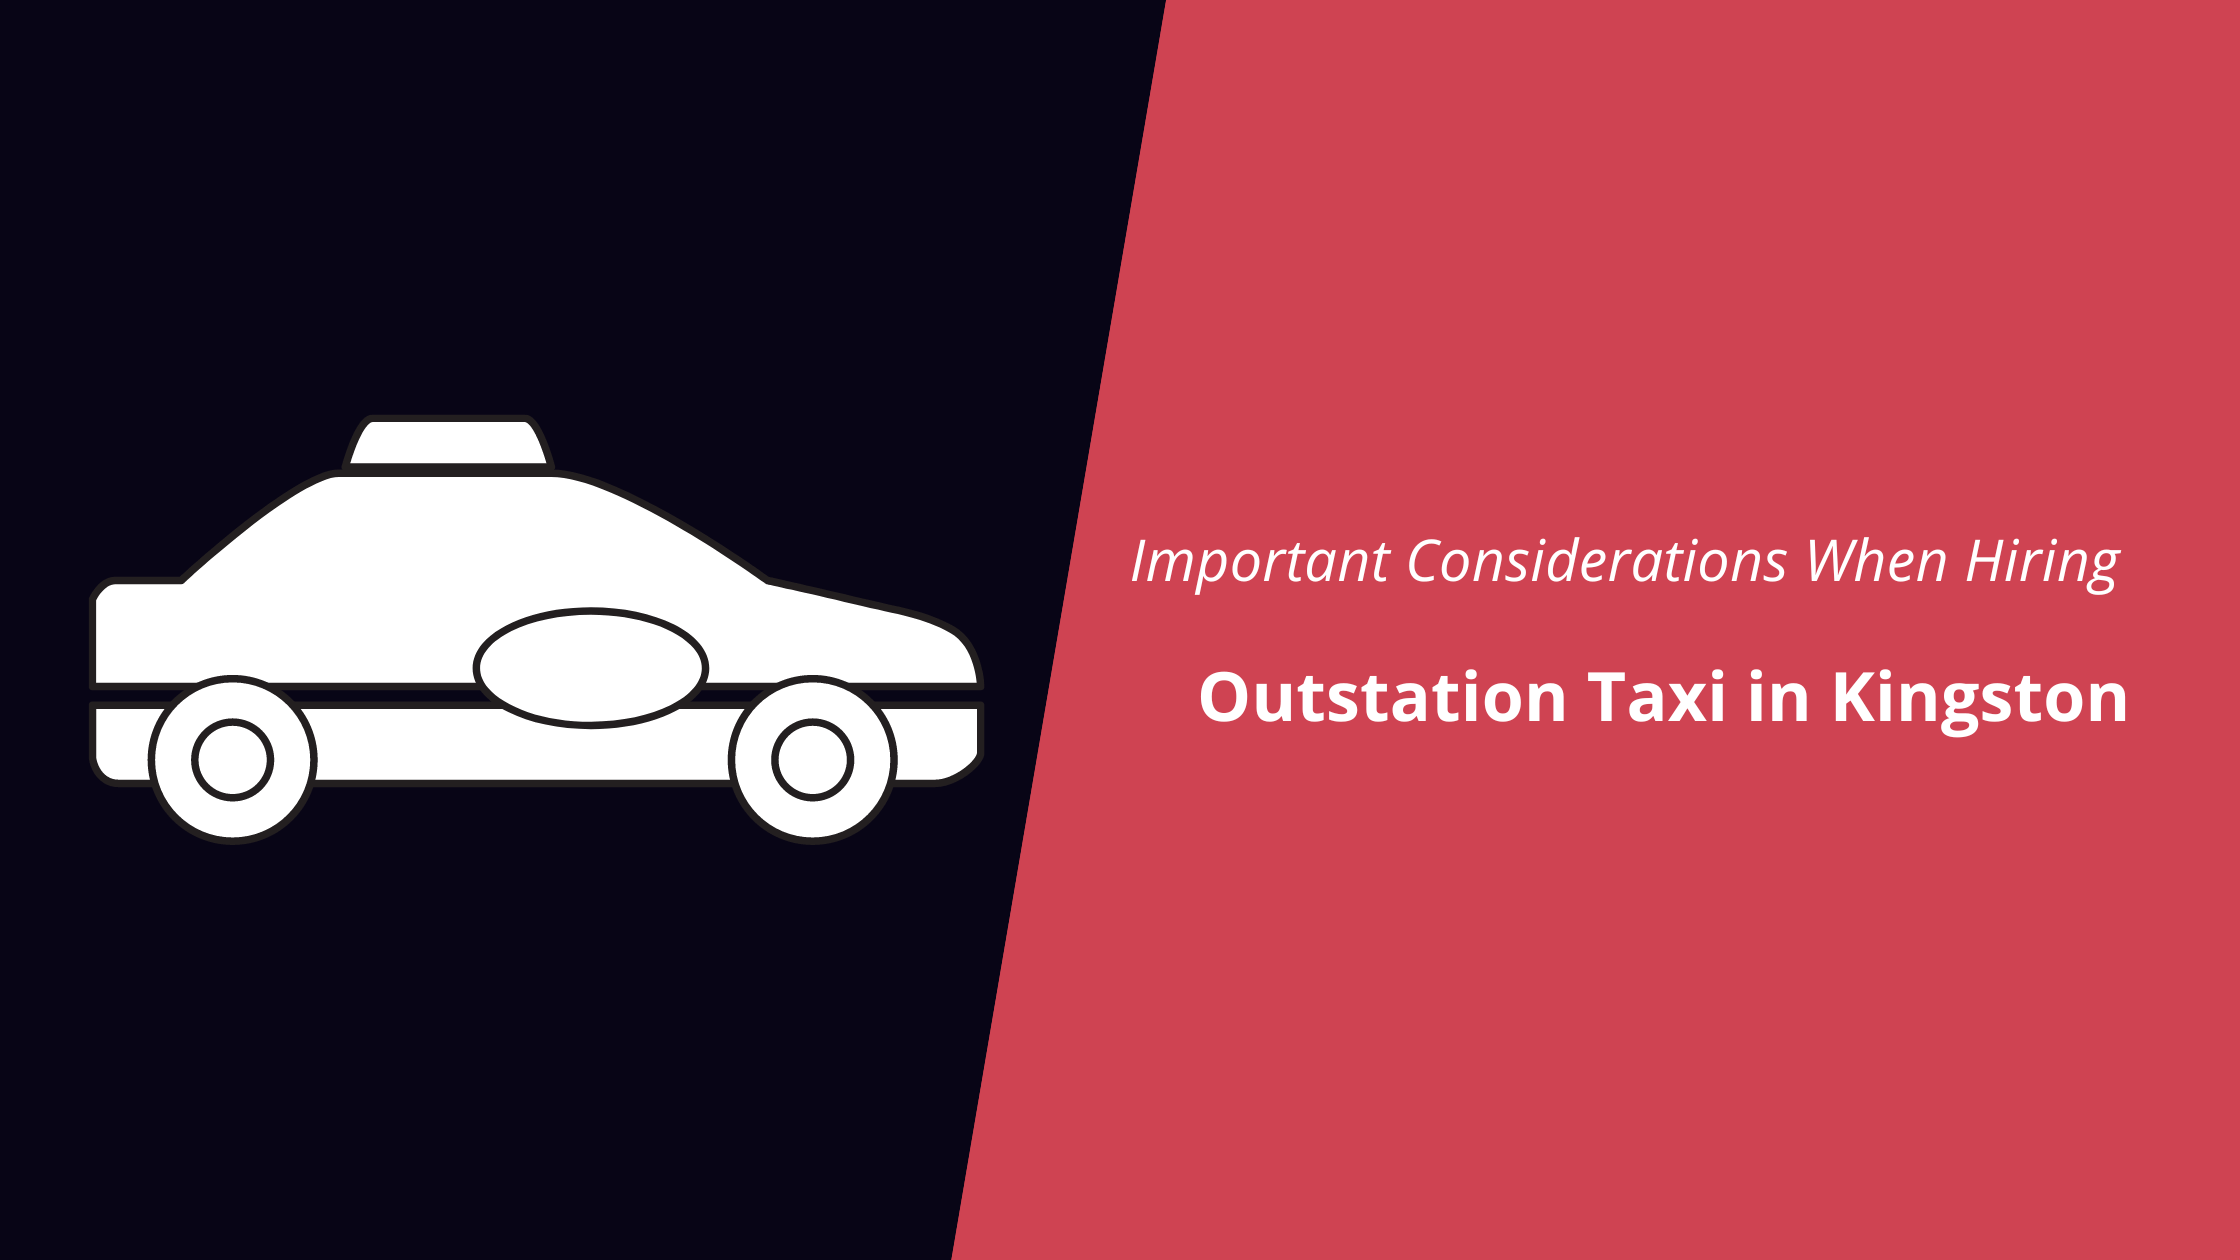 Considerations When Hiring Taxi in Kingston